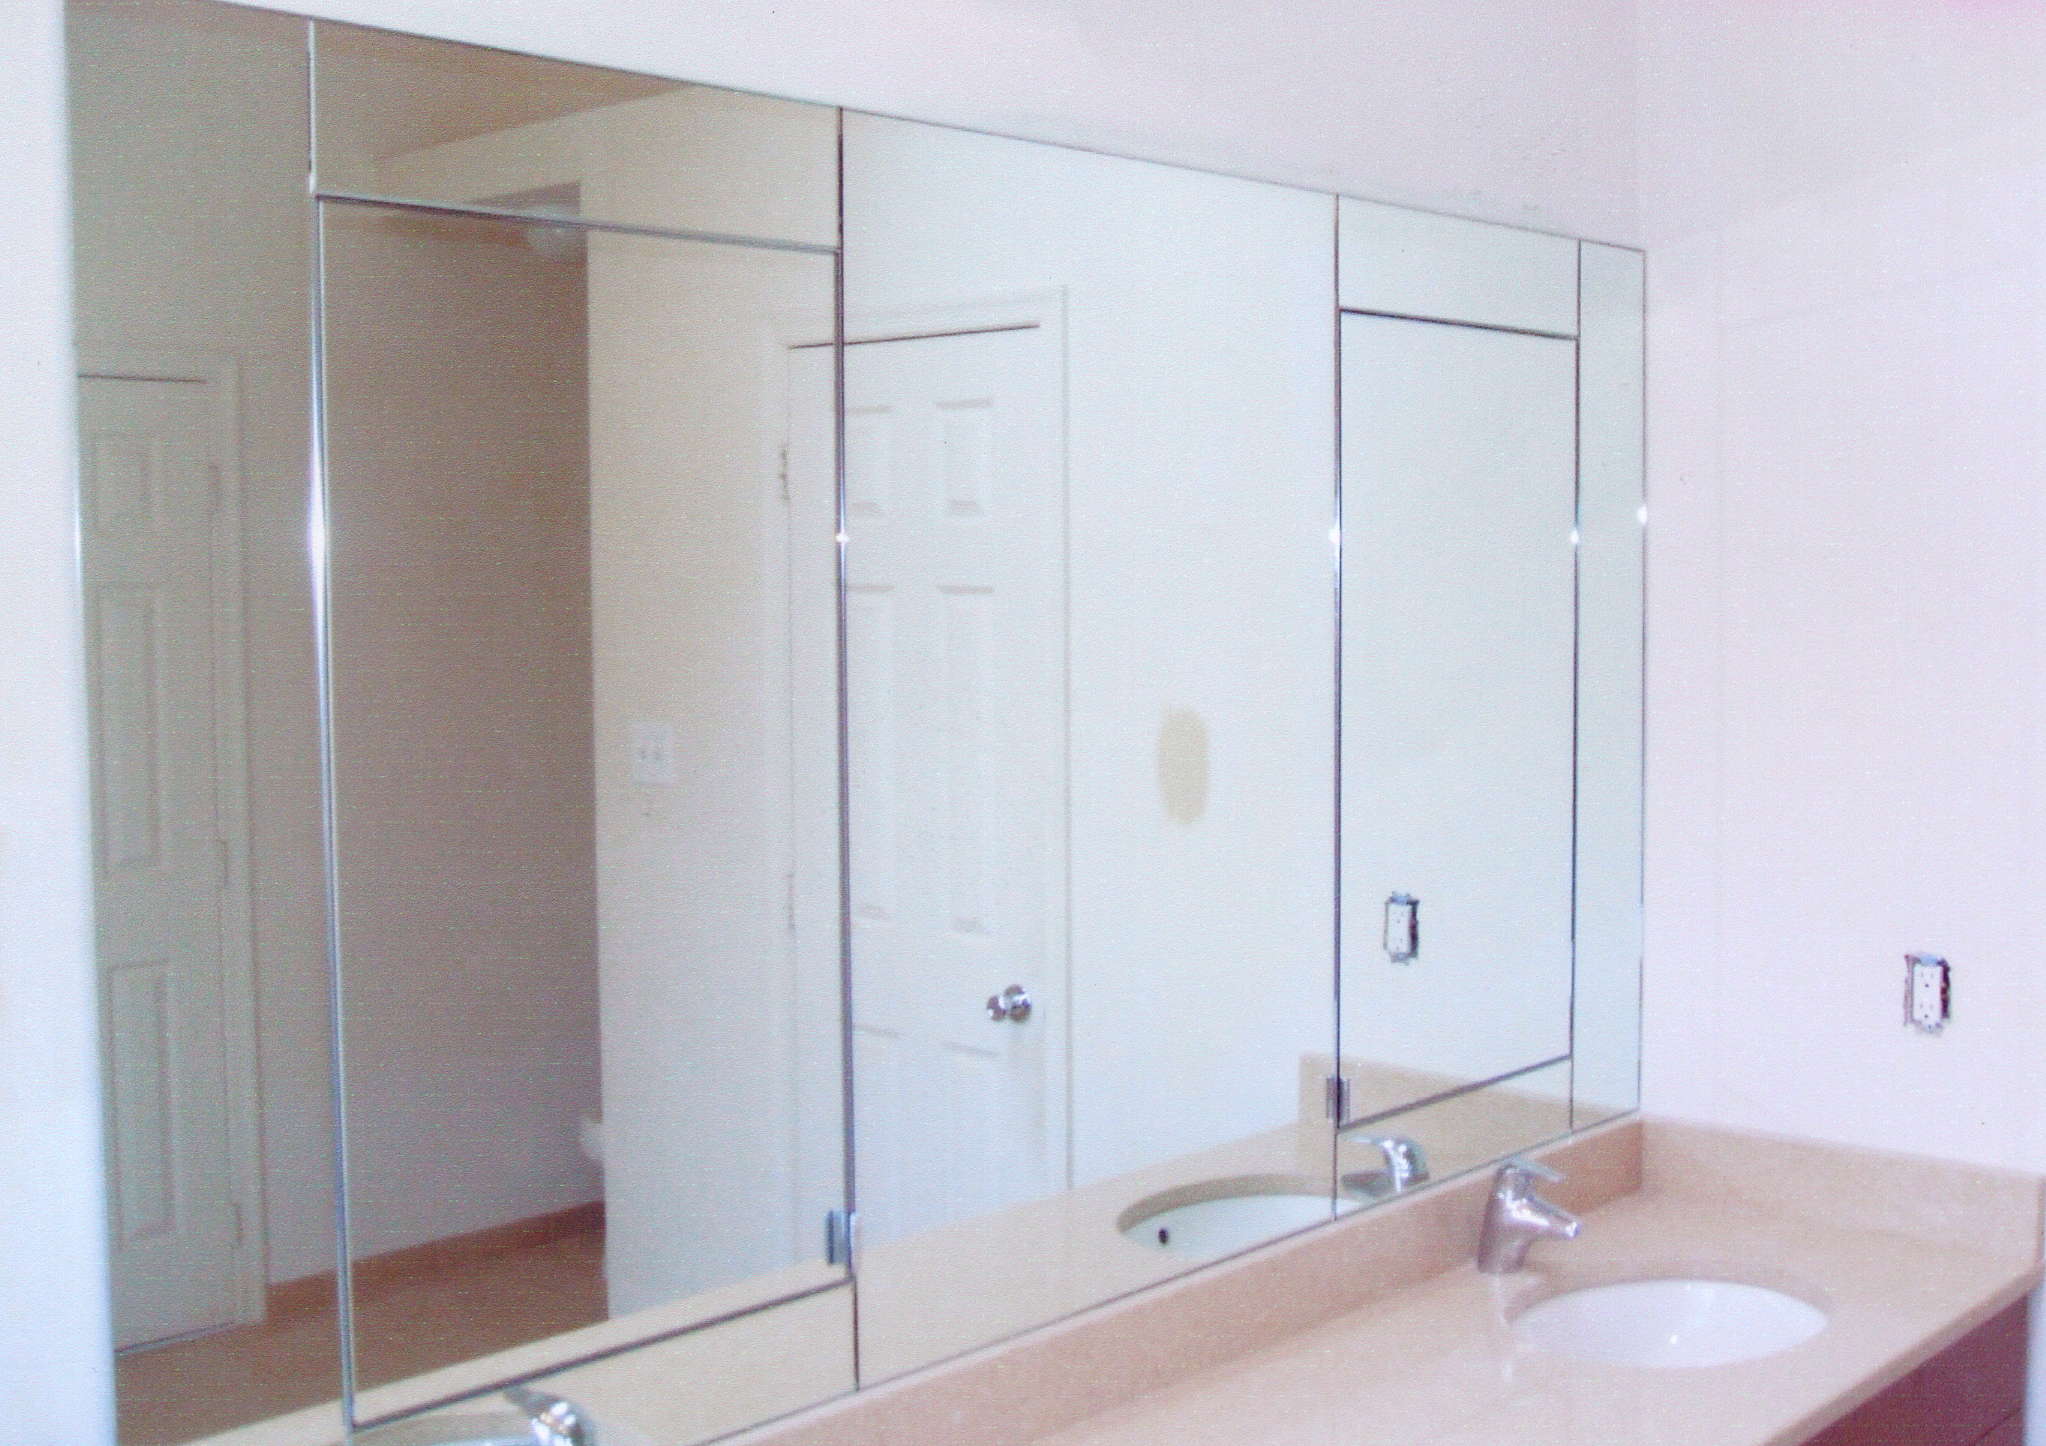 keep-your-wall-mirrors-squeaky-clean-with-these-basic-tips-rockville-md